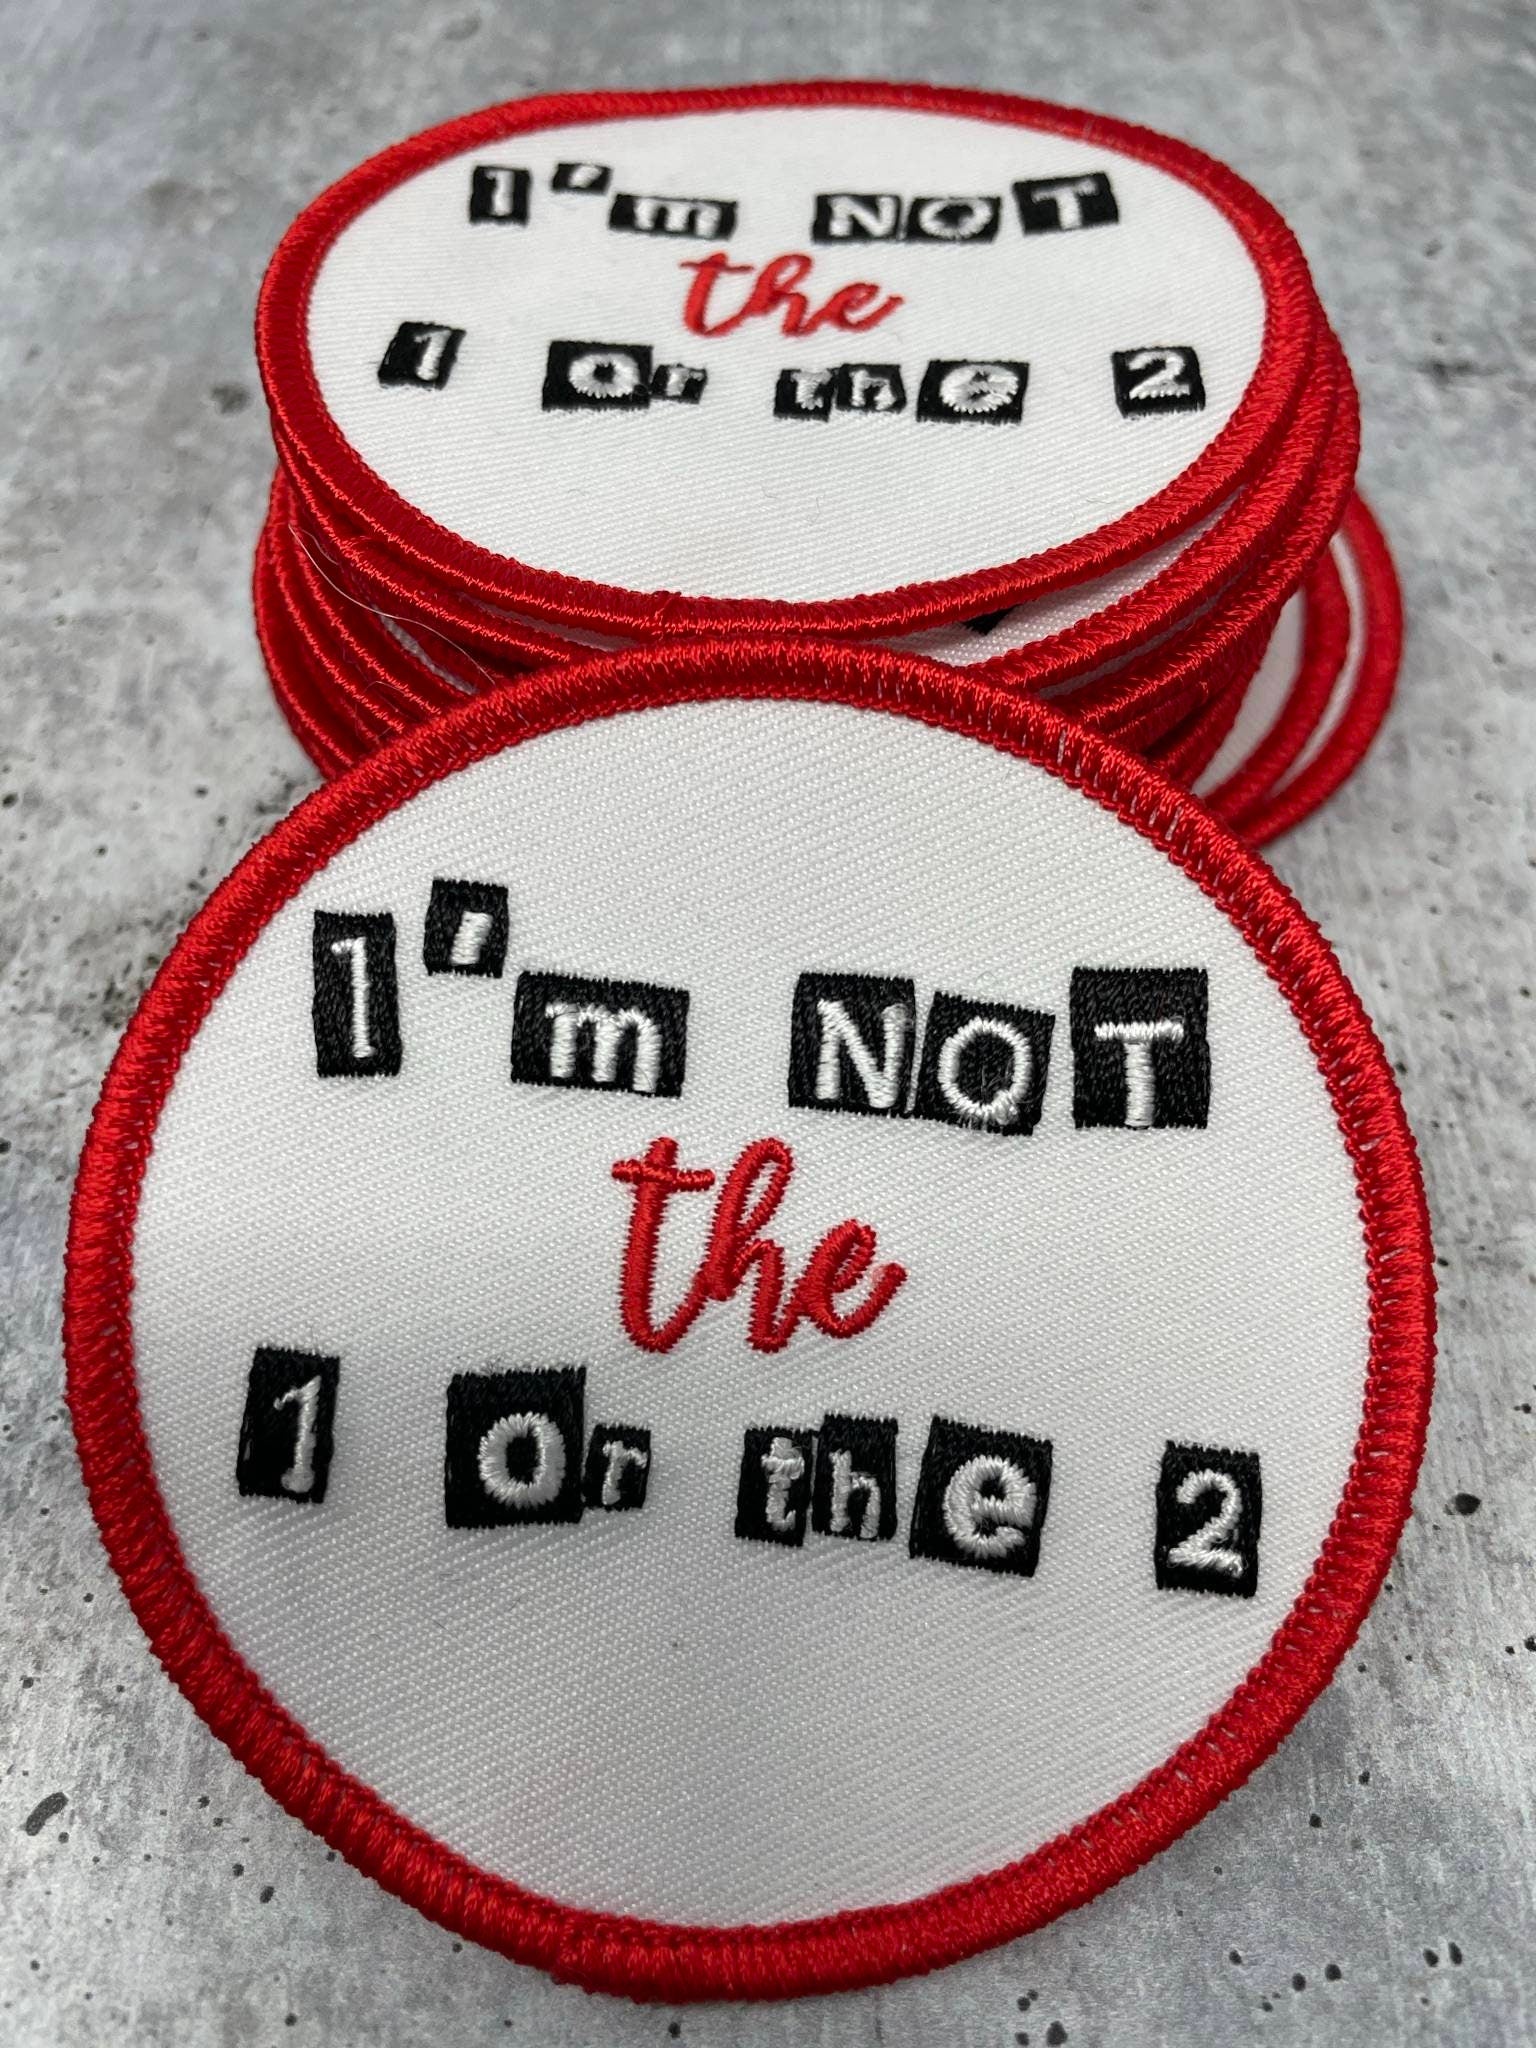 Statement Patch, "I'm Not the 1 or the 2", Quote of the Day, Iron-on Embroidered Patch, Wordy Applique, Size 3" Circular Badge, Small Badge